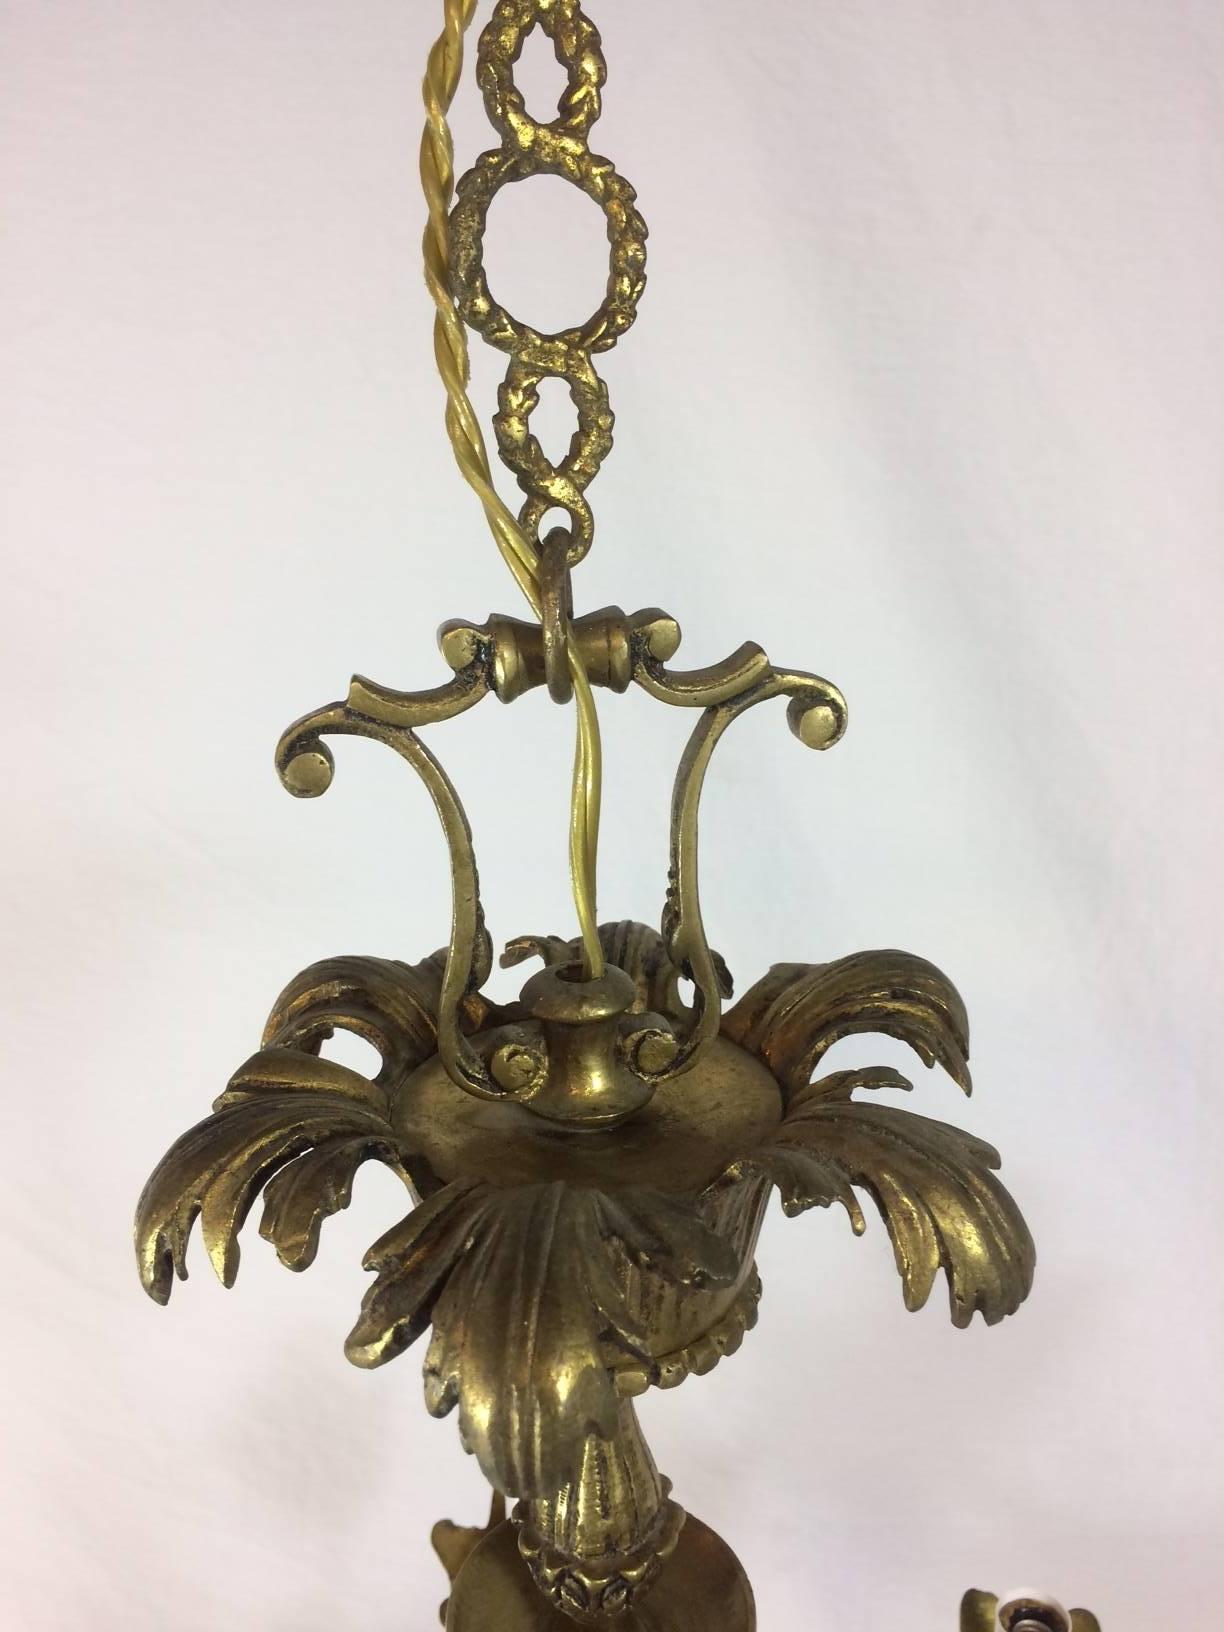 Six-arm Empire style ram's head chandelier. Solid brass and heavy. Has great patina. In working condition.  Will be professionally packed and shipped. Price based on destination.